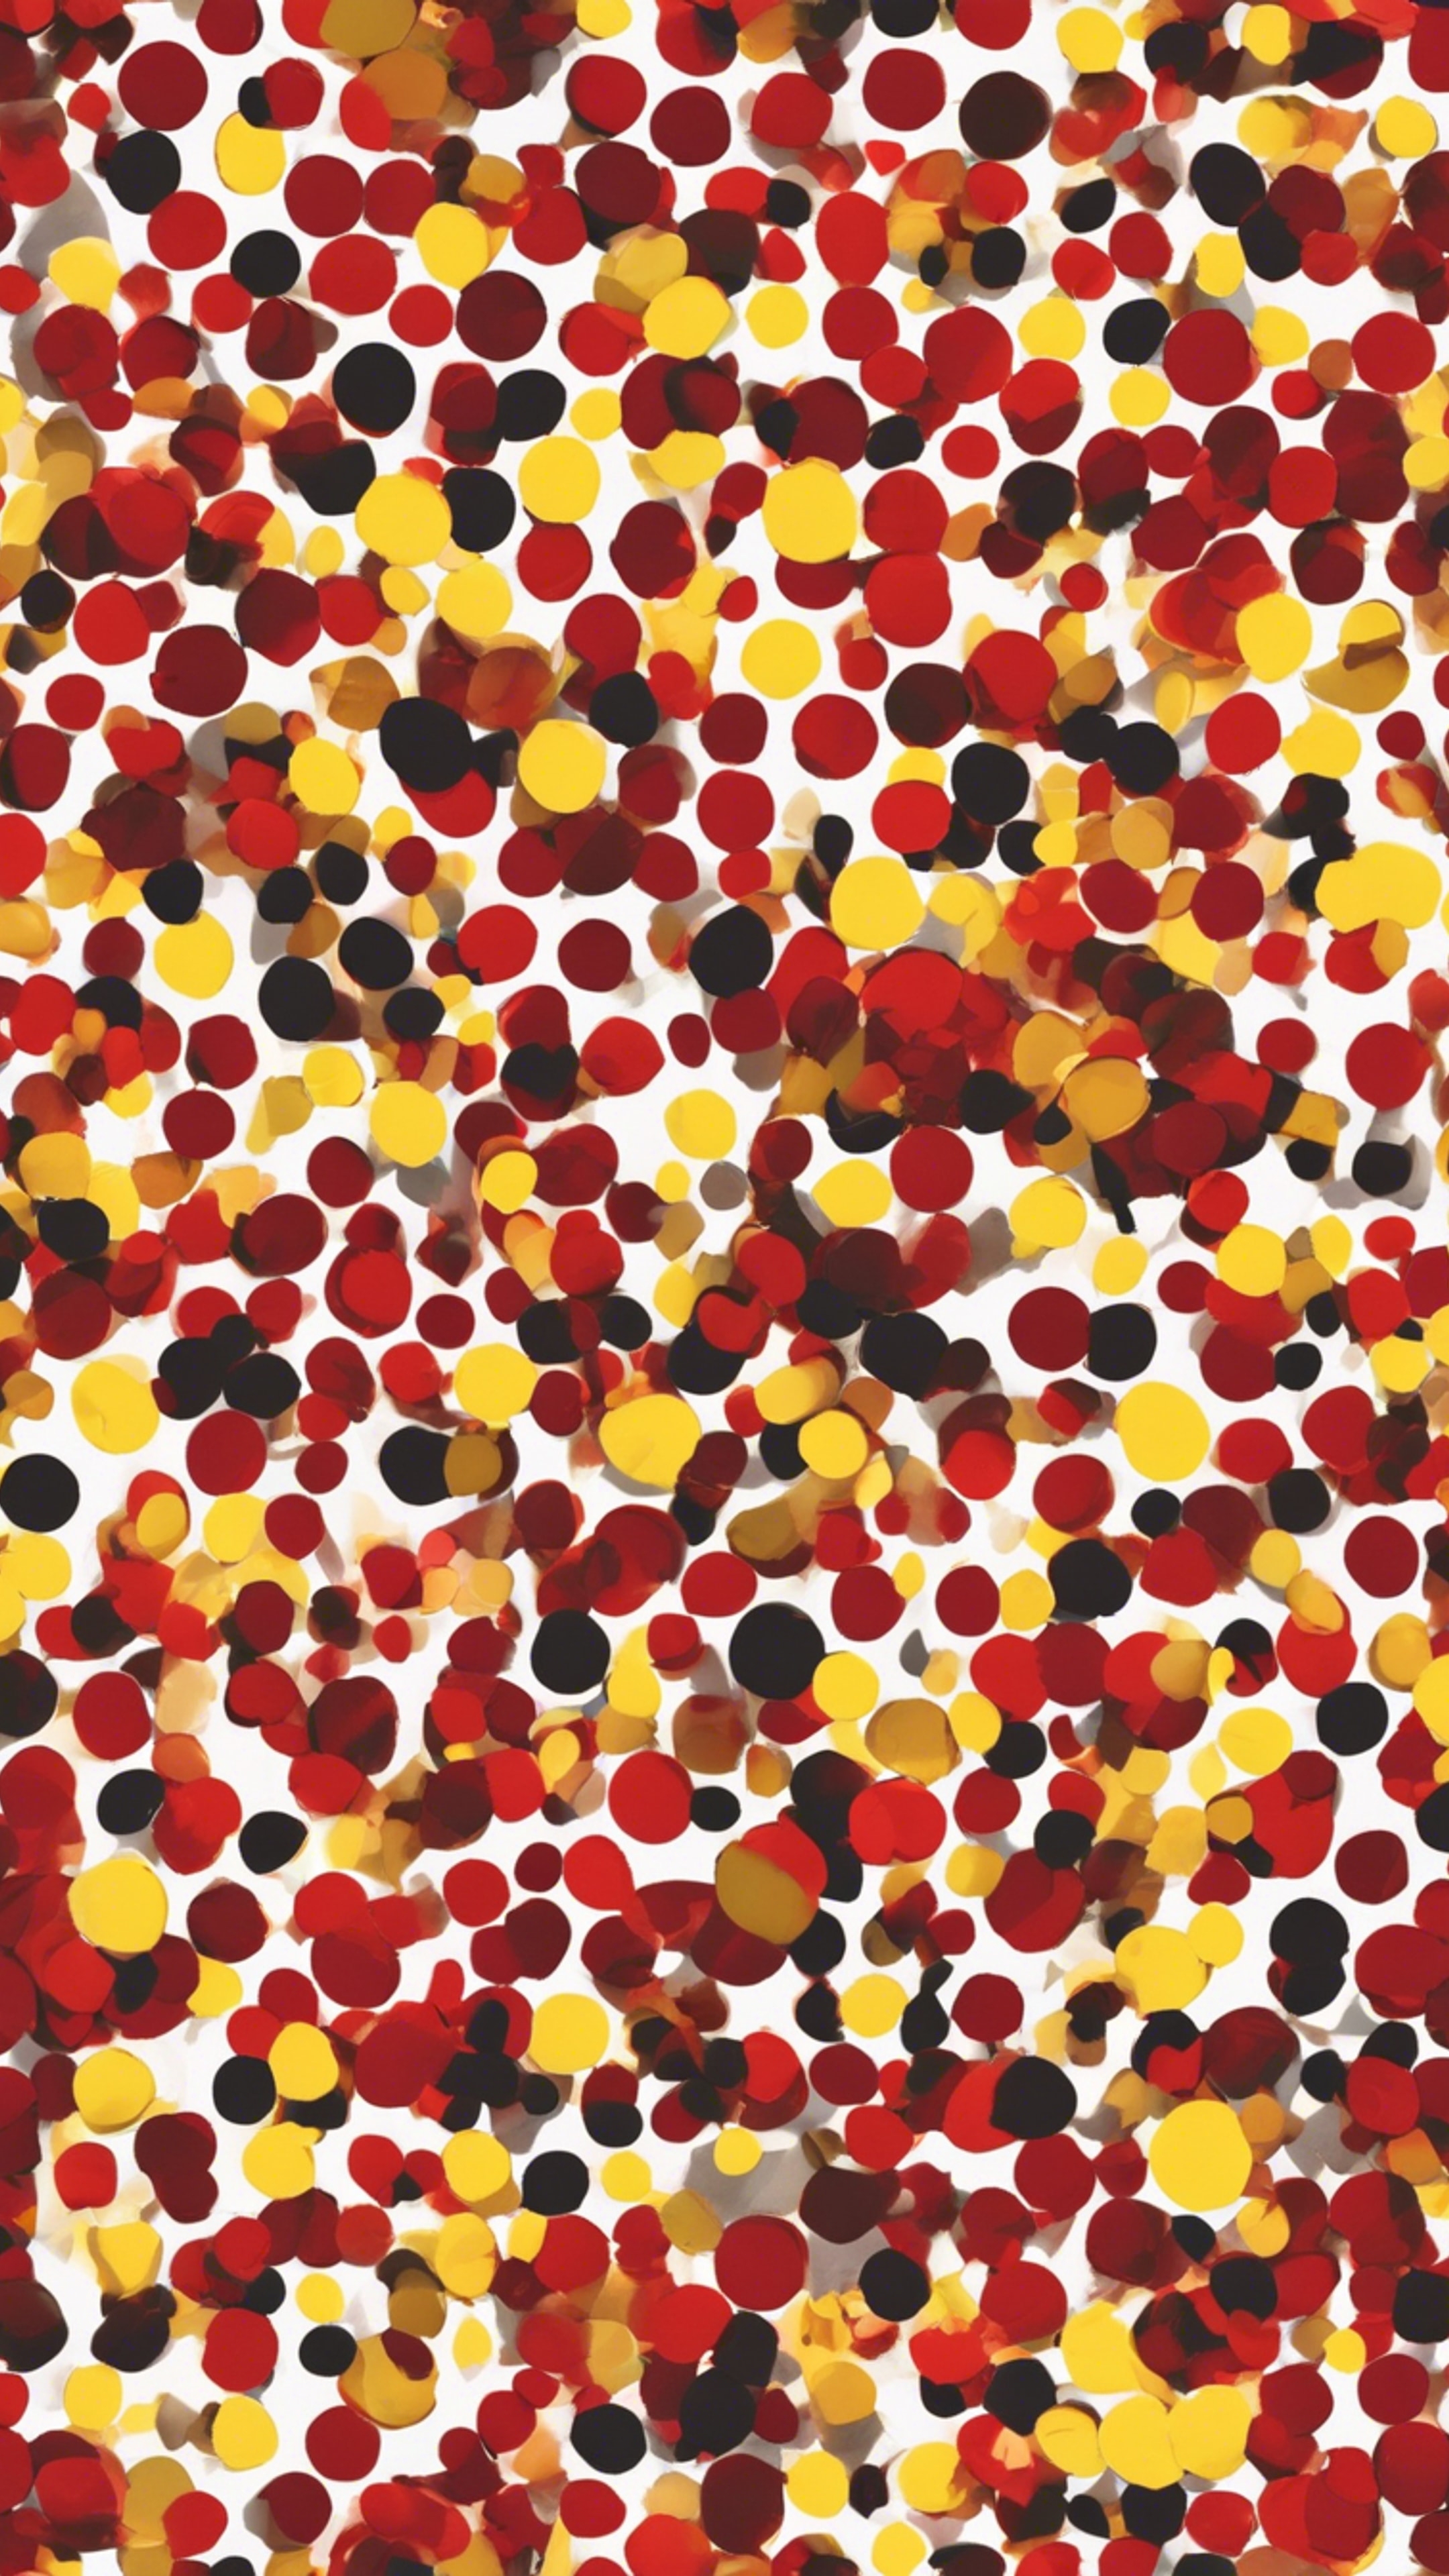 Scattered polka dots, small red ones and large yellow ones, in a seamless pattern. Hintergrund[491989b84cbb438494fe]